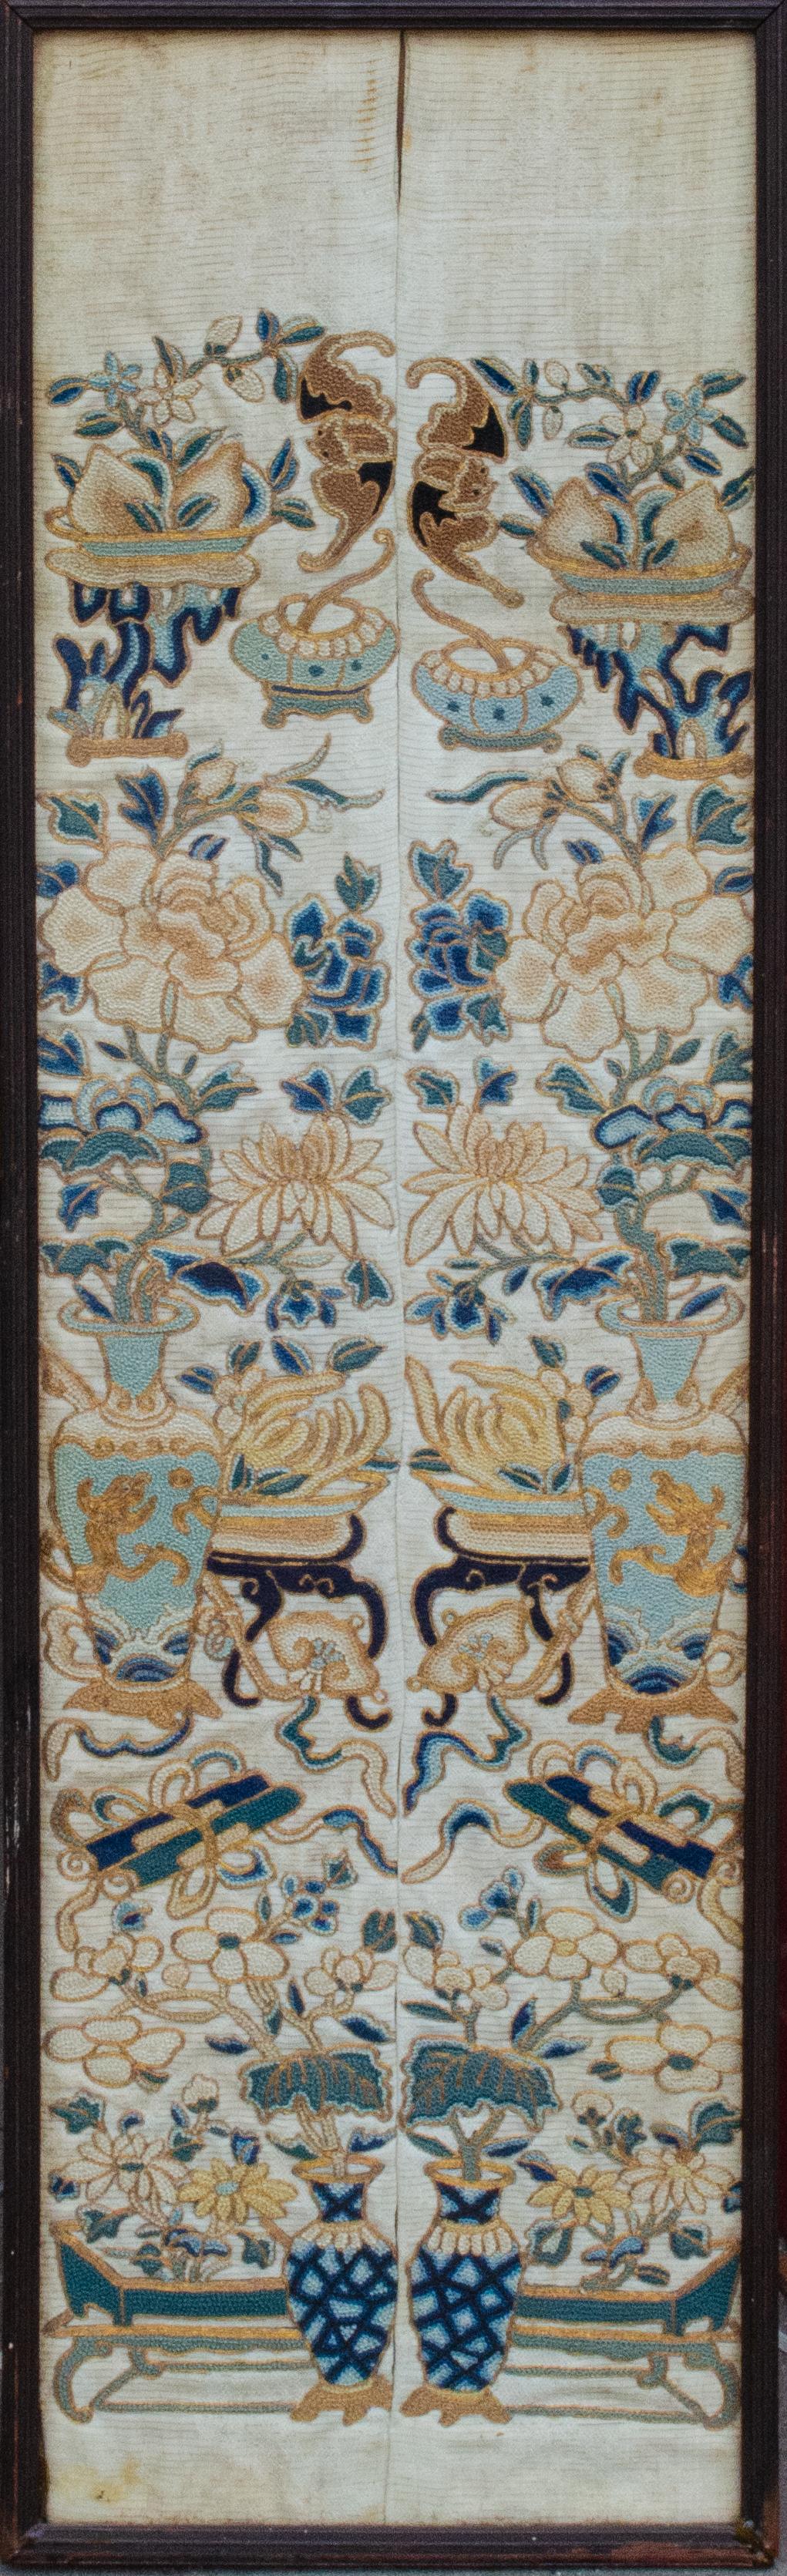 Qing Dynasty Embroidered Textile - Other Art Style Art by Unknown